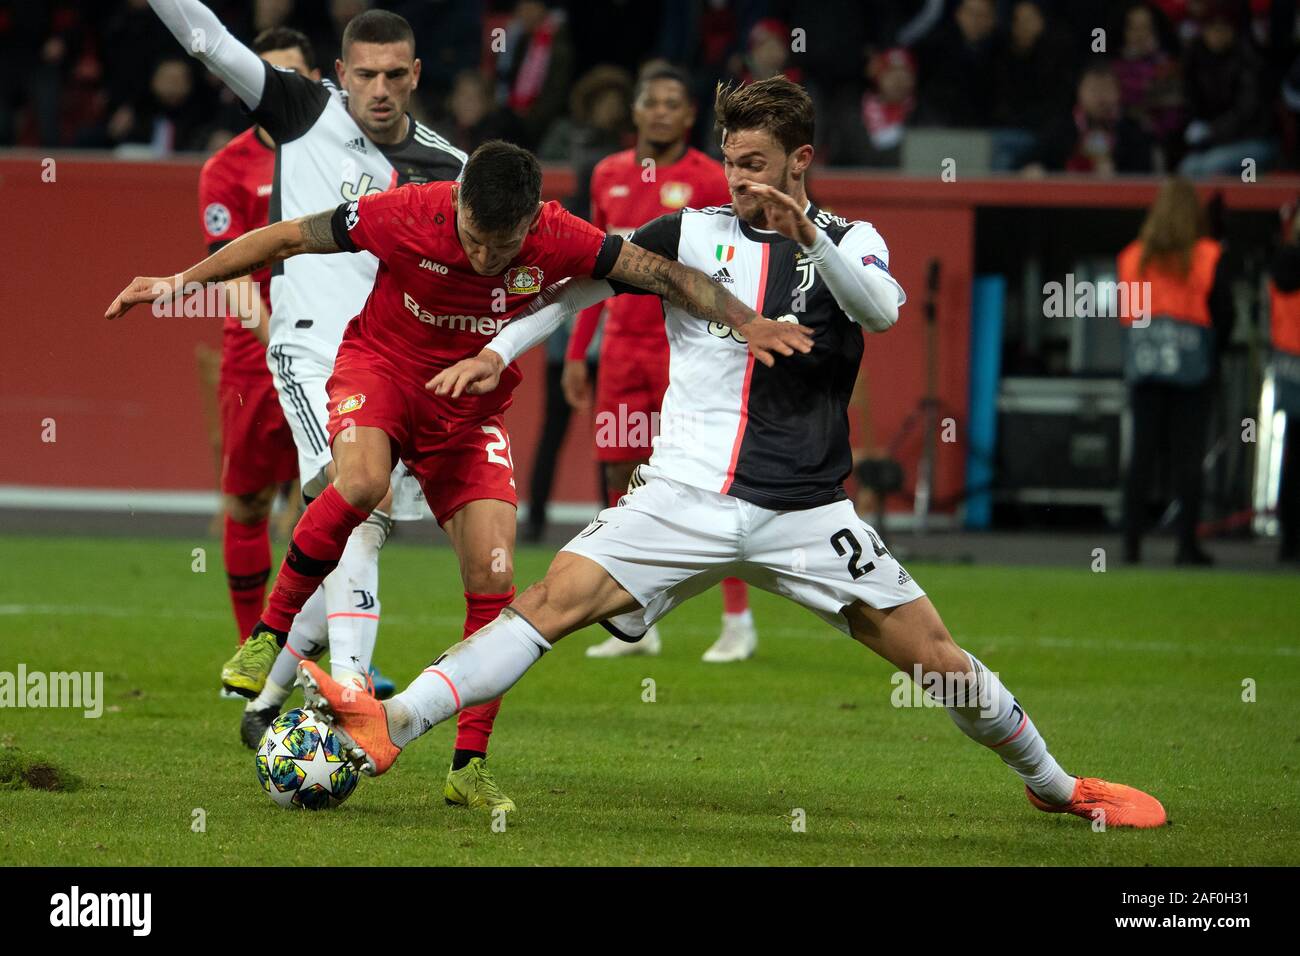 Leverkusen, Germany. 11th Dec, 2019. Soccer: Champions League, Bayer Leverkusen - Juventus Turin, Group stage, Group D, 6th matchday in the BayArena. Leverkusens Charles Aranguiz (l) and Turins Daniele Rugani fight for the ball. Credit: Federico Gambarini/dpa/Alamy Live News Stock Photo